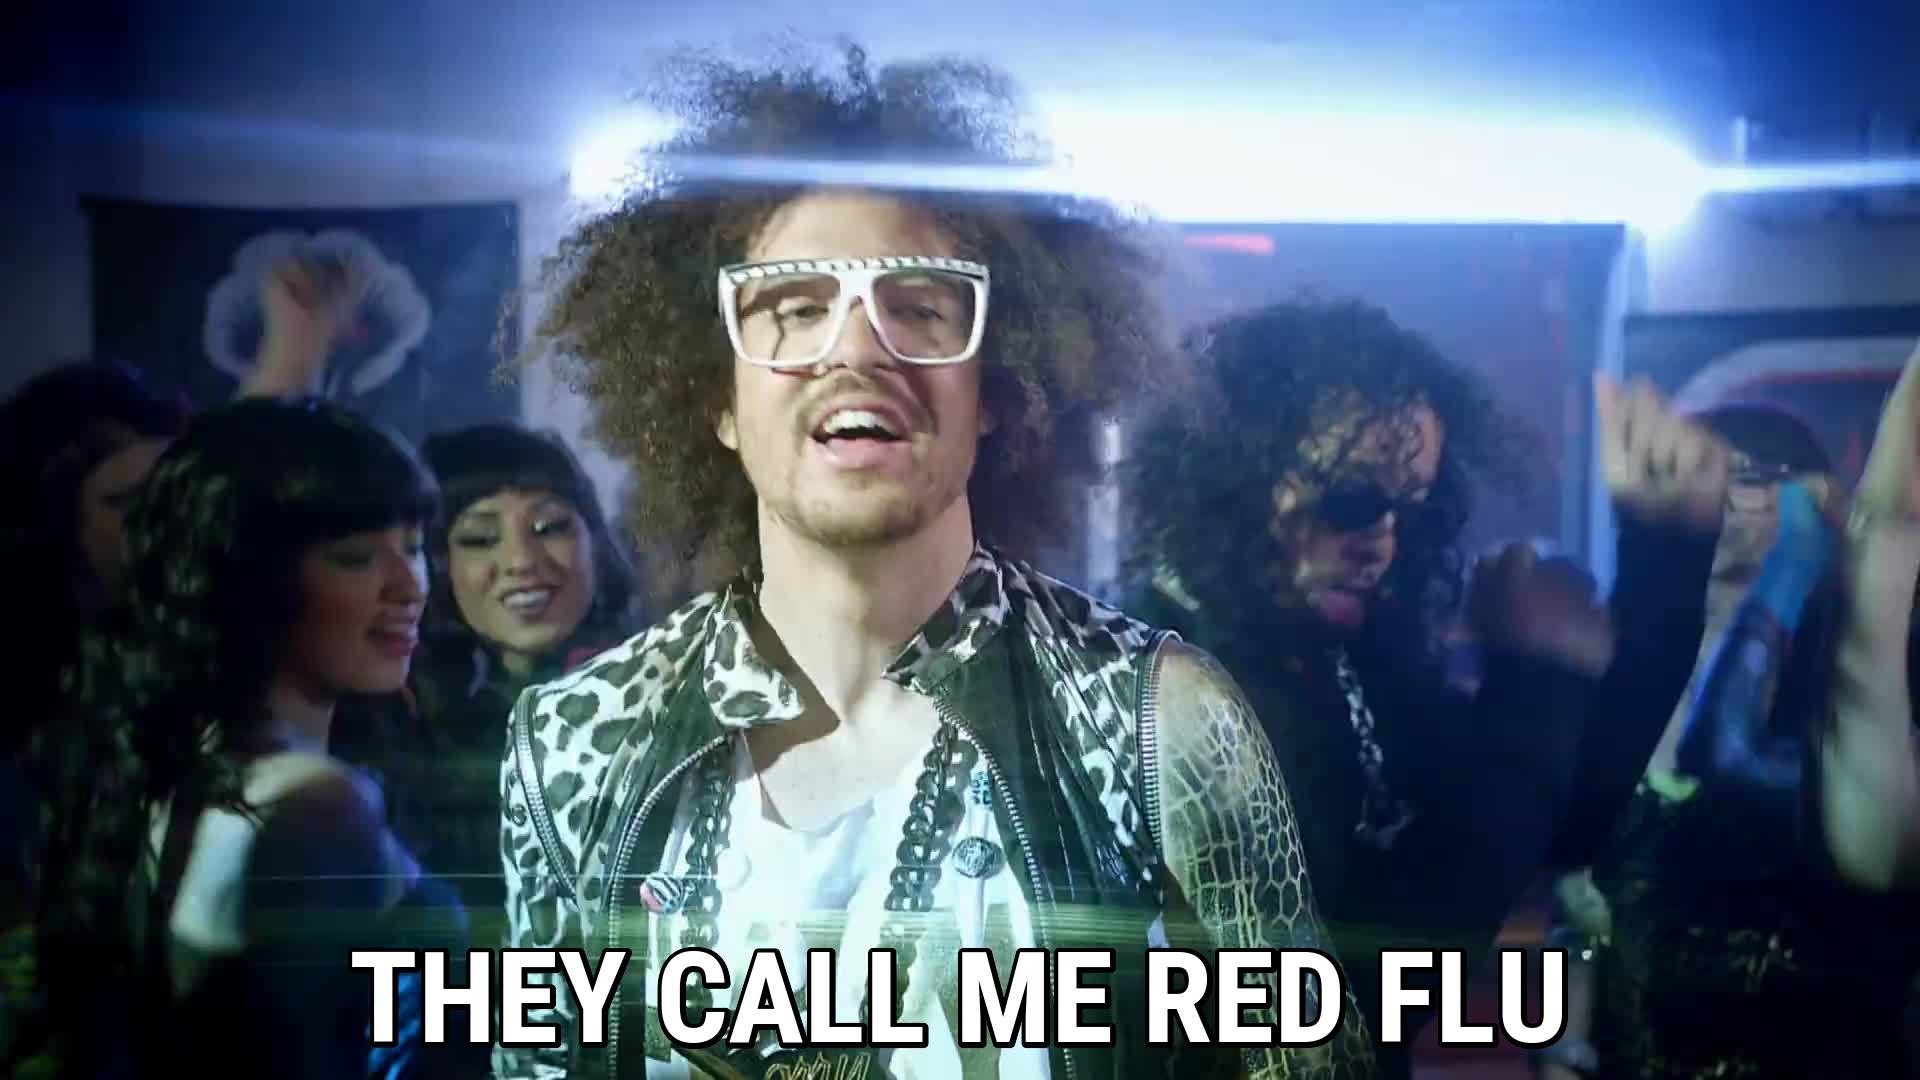 1920x1080 They call me red flu